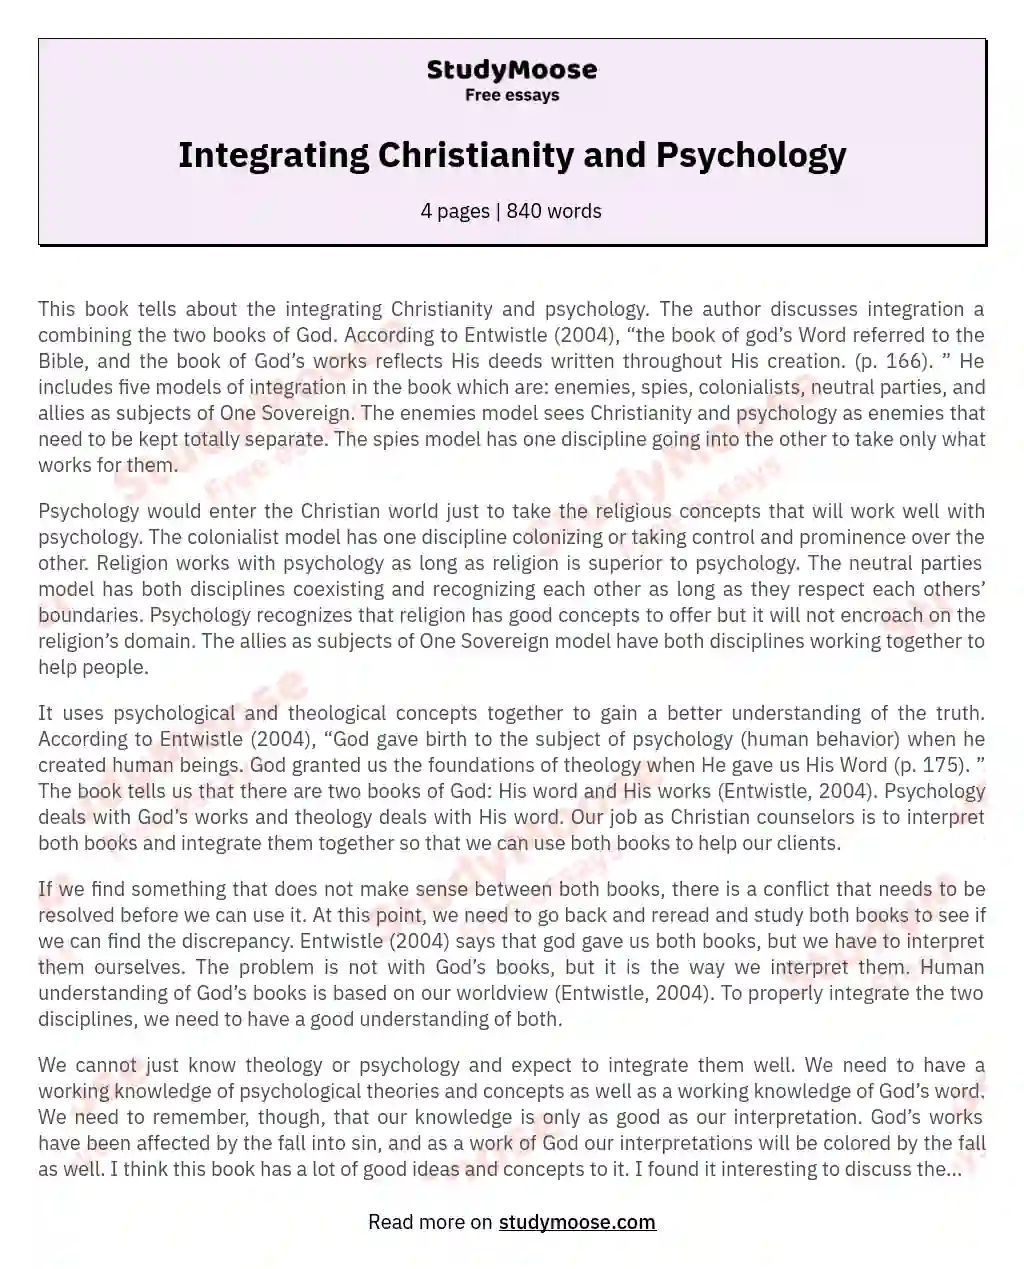 Integrating Christianity and Psychology essay